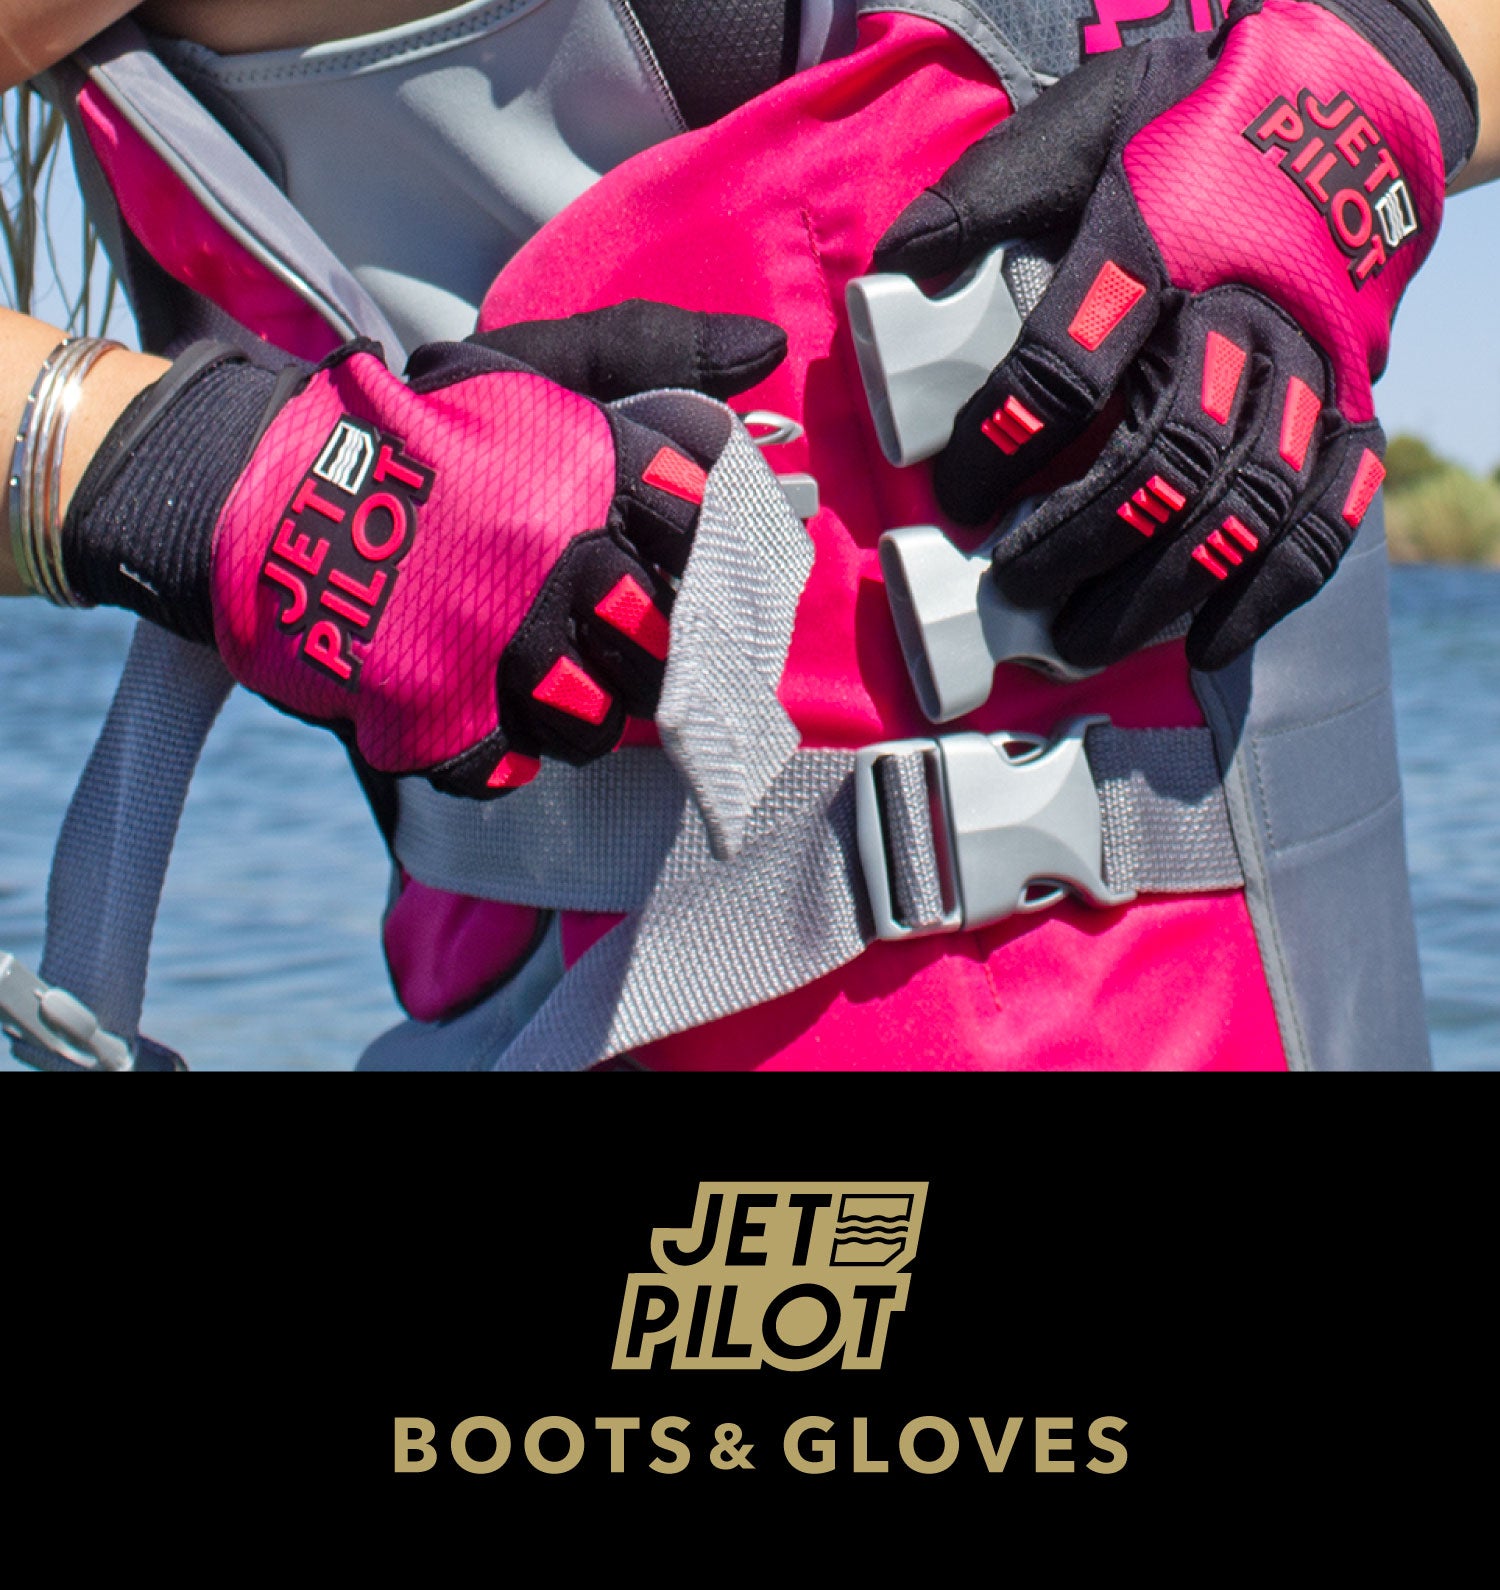 Jetpilot Boots and Glove collection.